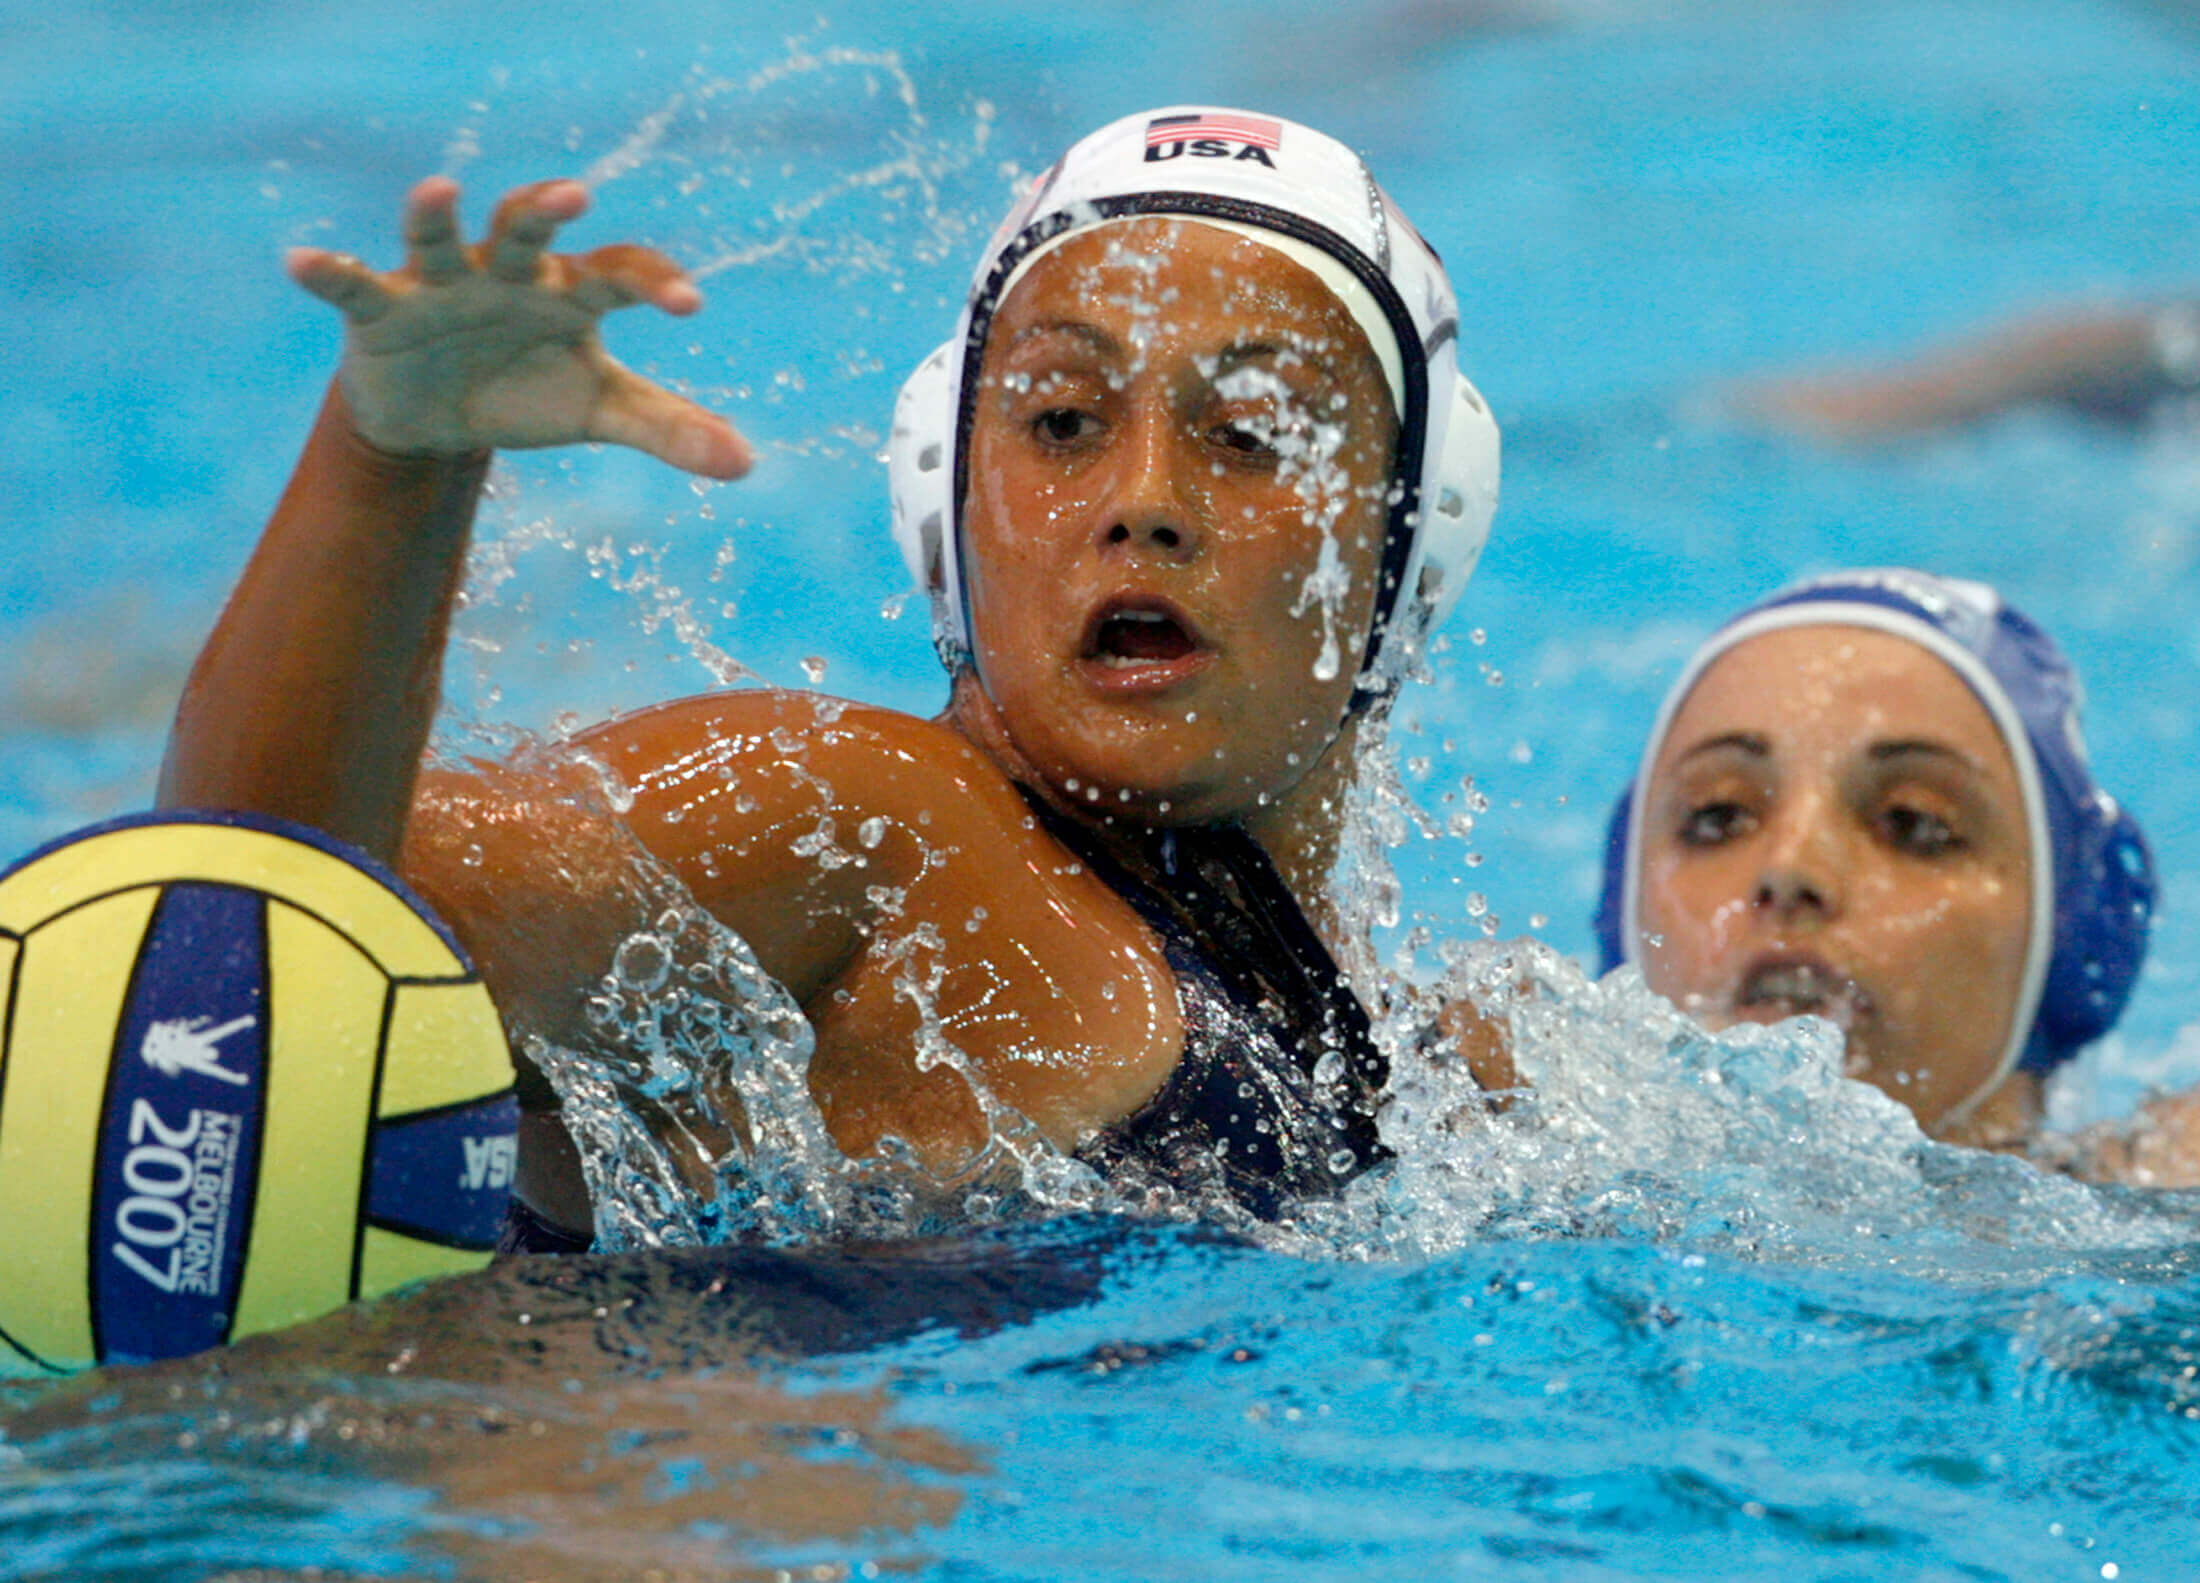 Olympic Water Polo Player Brenda Villa To Be Inducted Into The International Swimming Hall Of